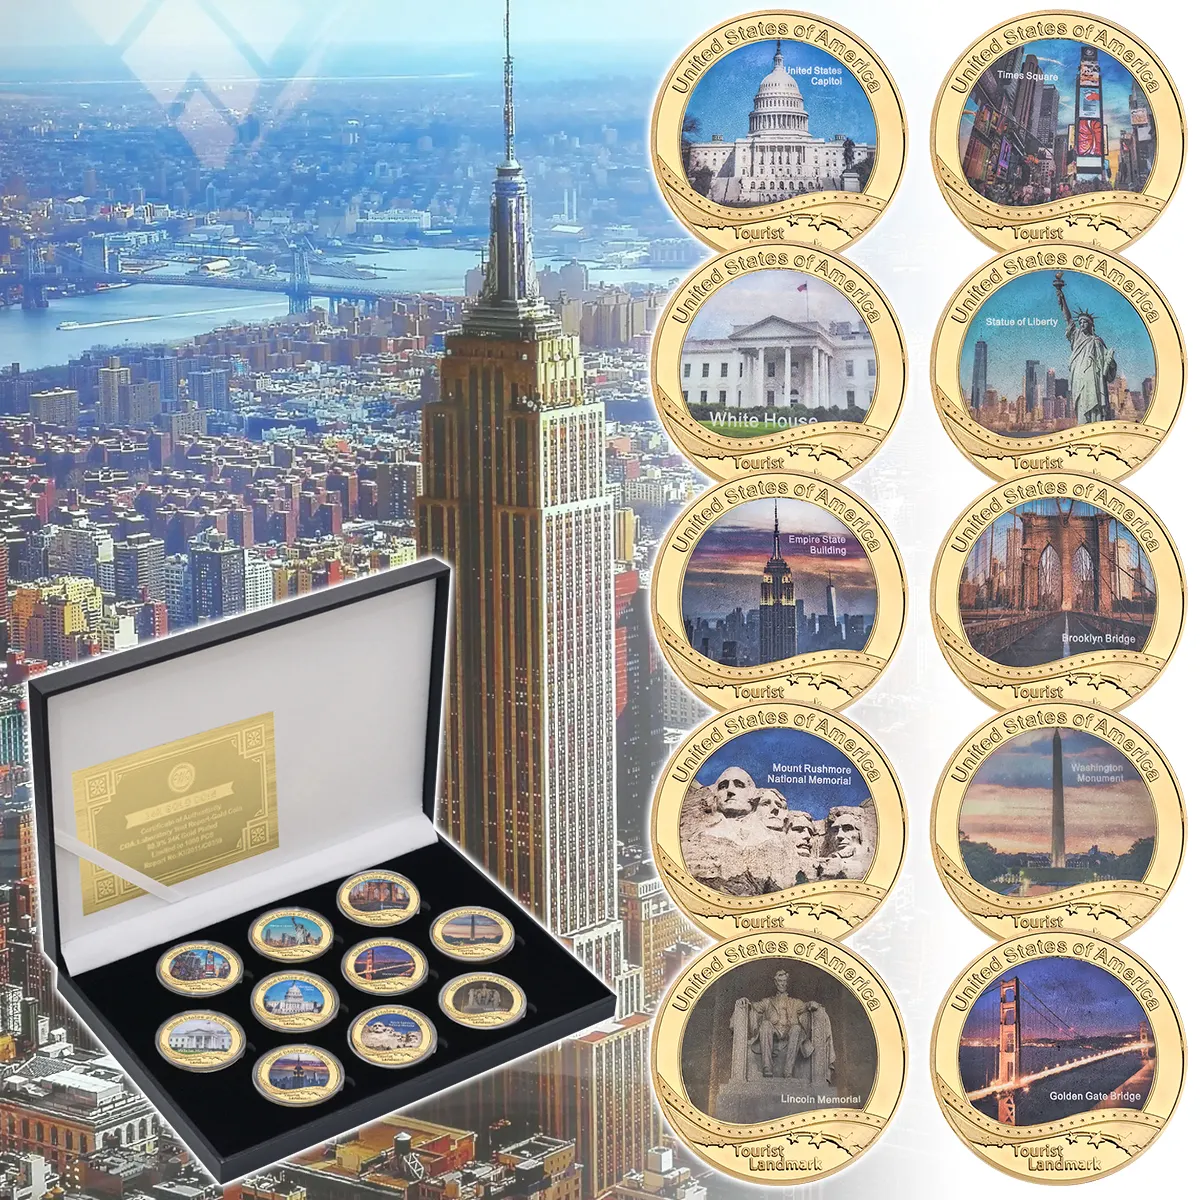 American Famous Architecturals Commemorative Coins Lady Liberty Brooklyn Bridge Metal Coin for Collection